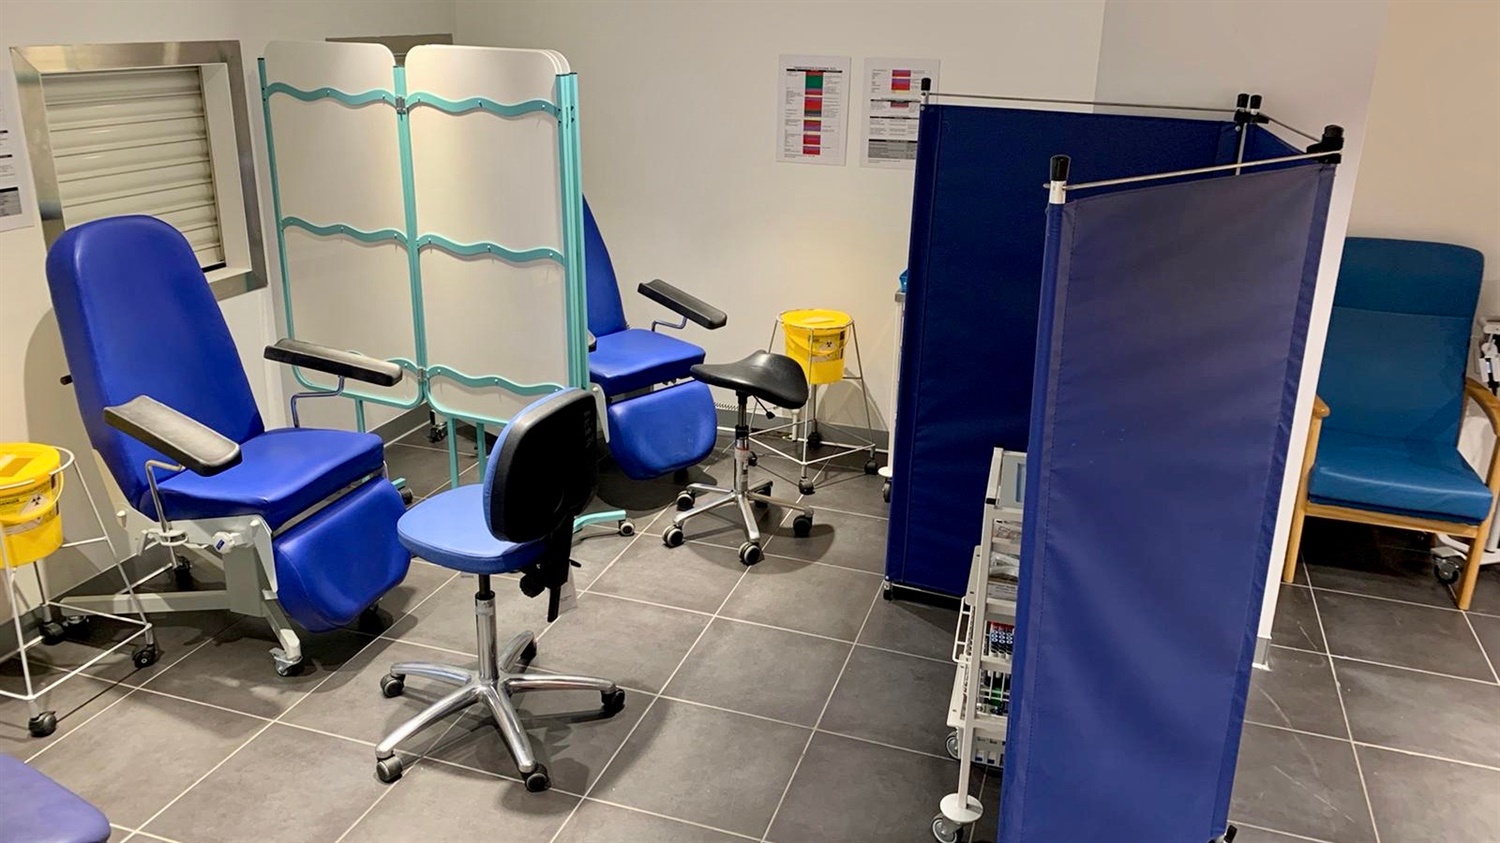 Birmingham New Street has opened an NHS outpatient clinic 